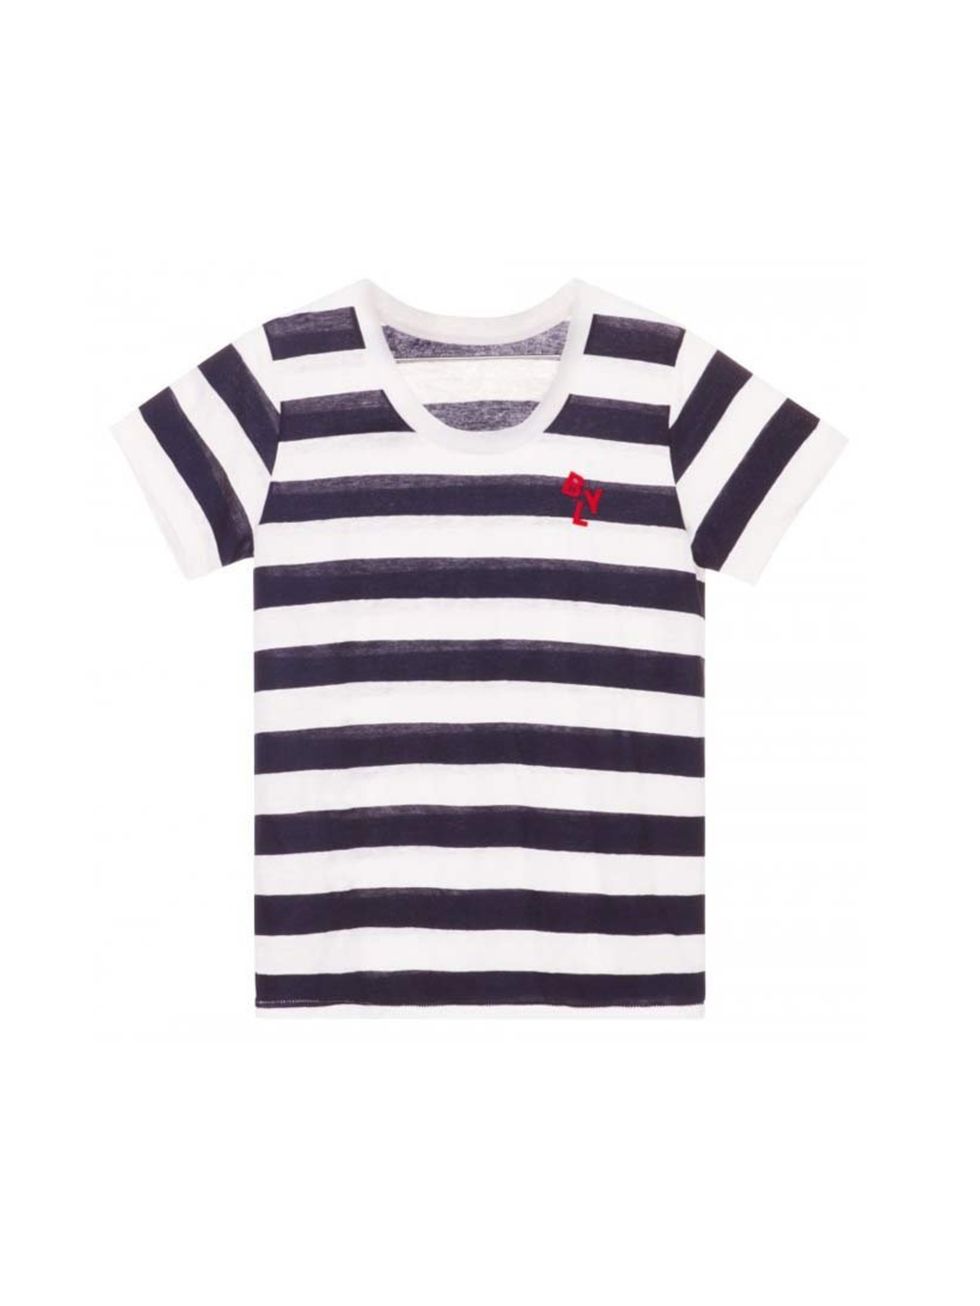 <p>Fashion Assistant Molly Haylor will be seaside-ready in this breton tee.</p><p><a href="http://www.bimbaylola.com/shoponline/product.php?id_product=10197&id_category=551">Bimba y Lola</a> t-shirt, £48</p>